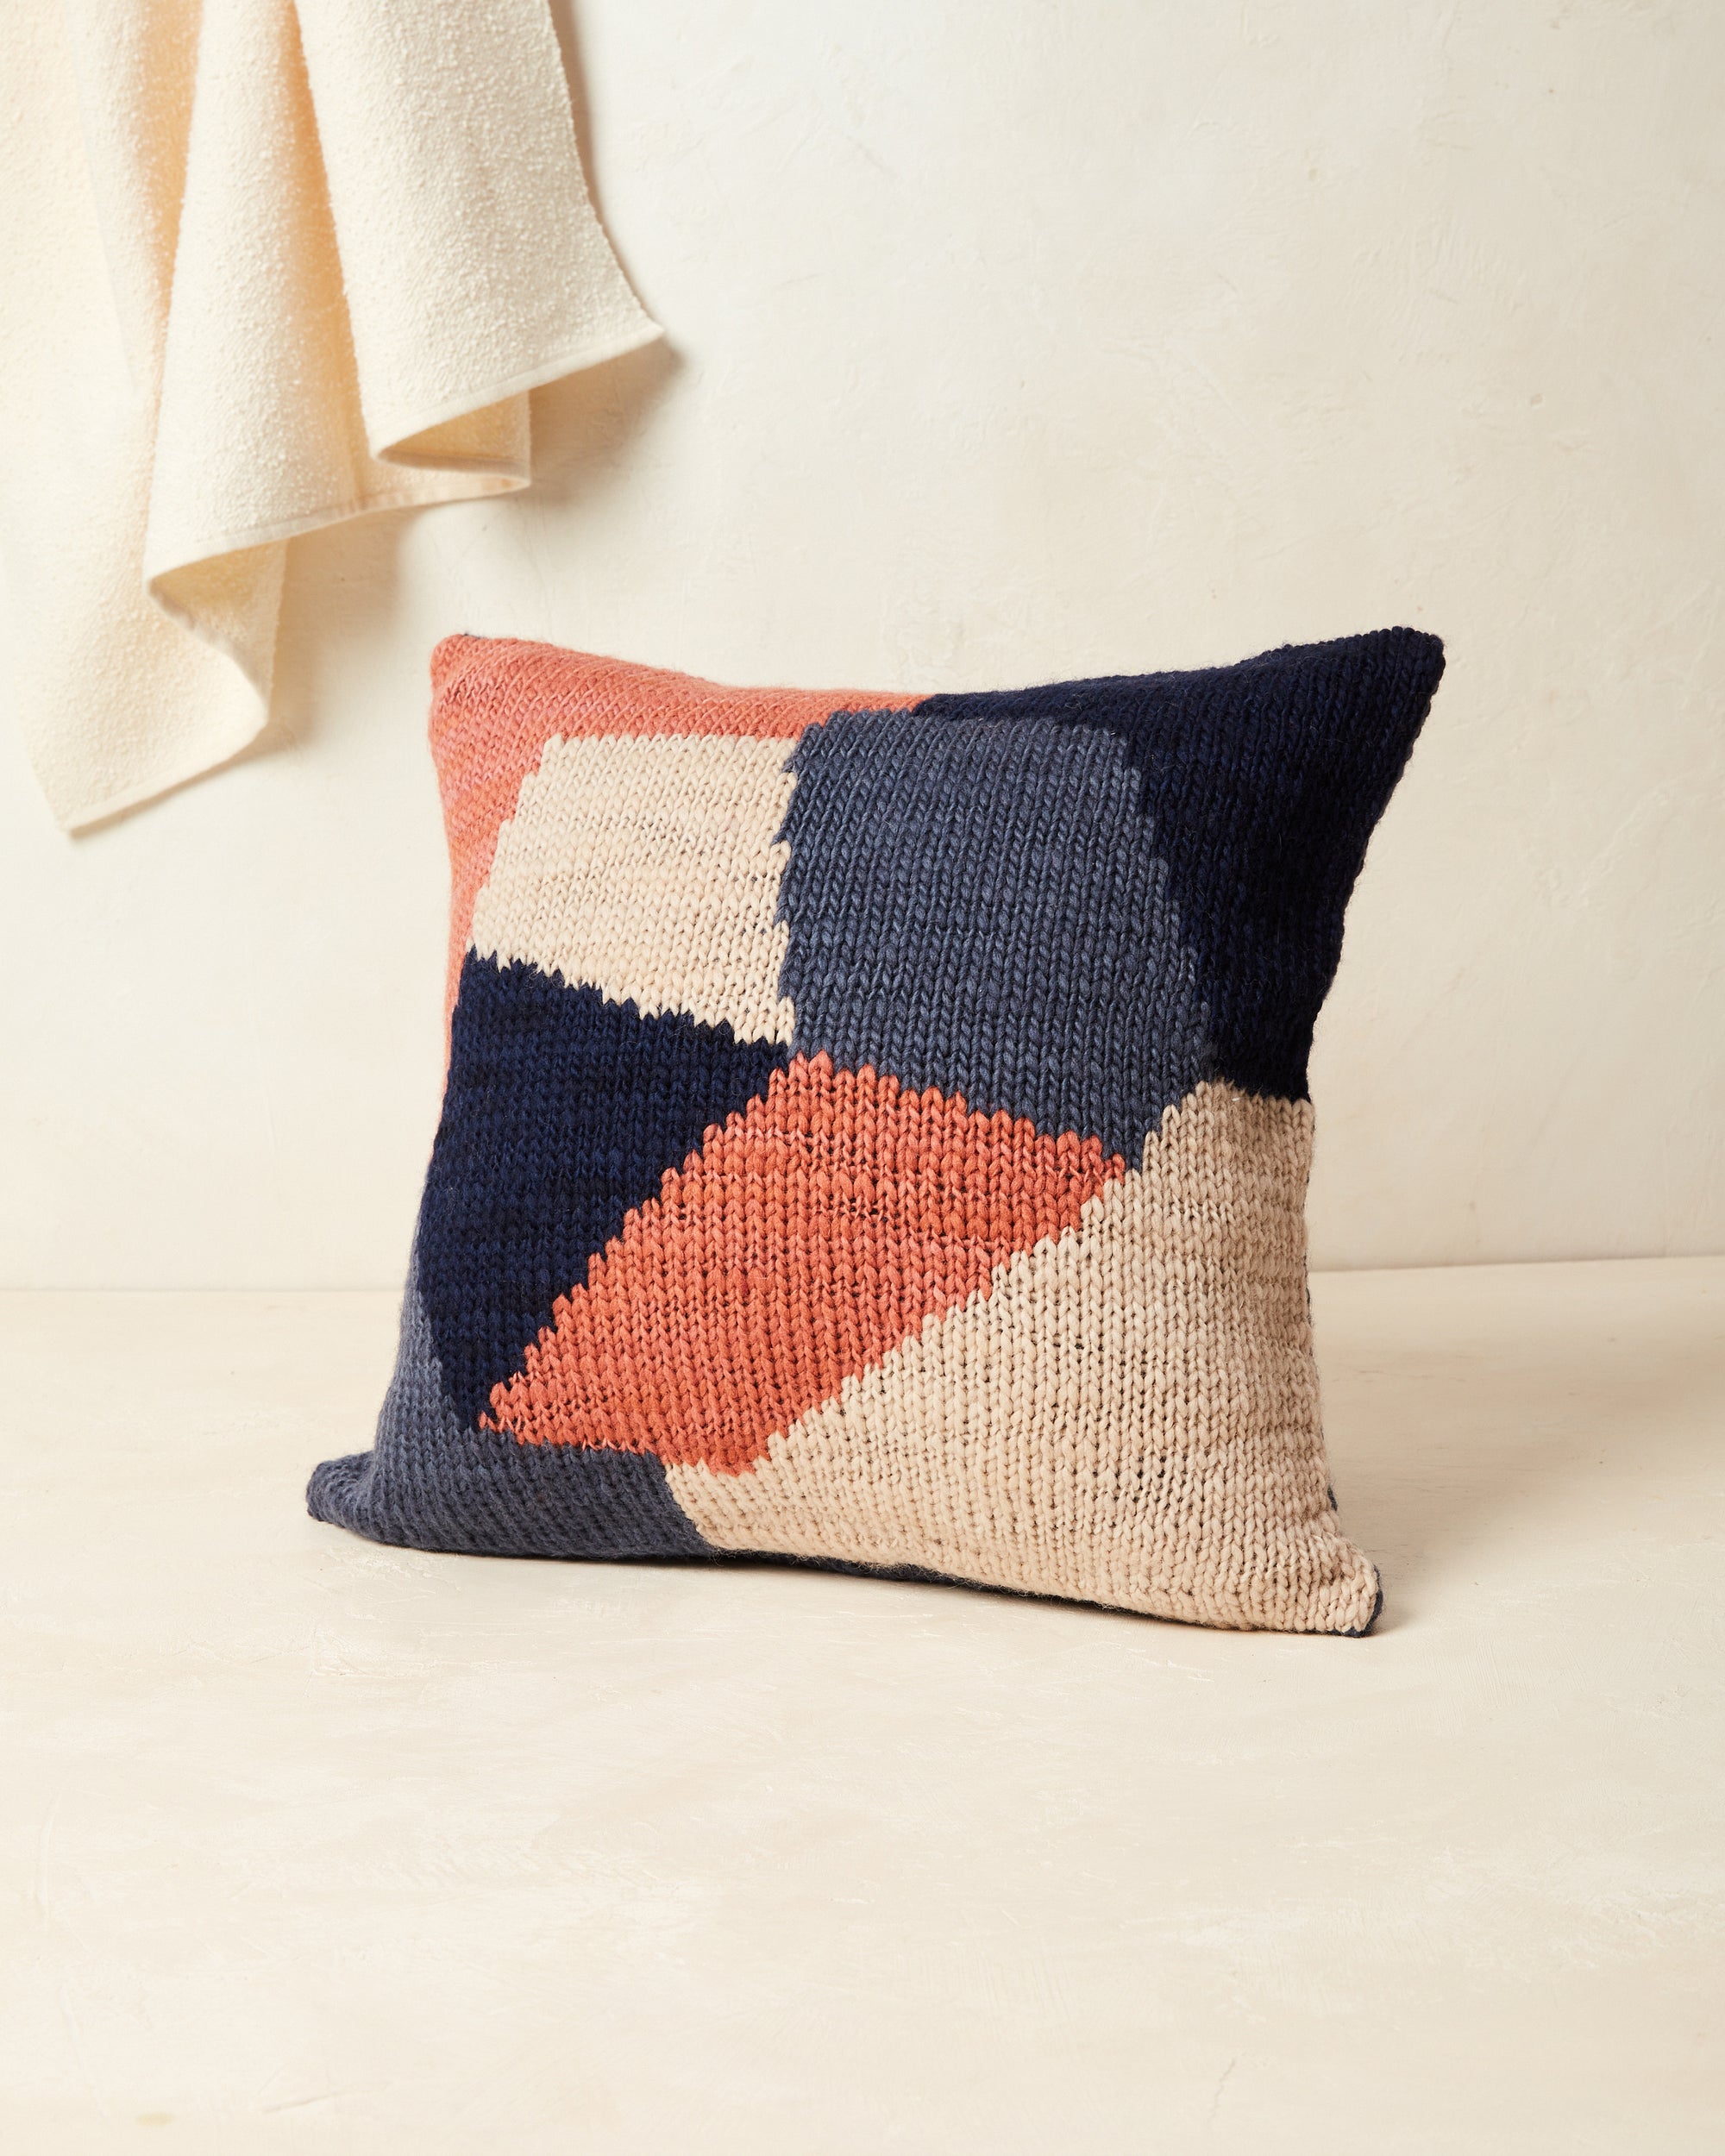 Ethically made knit graphic pillow by MINNA in dark blue, peach, and coral.